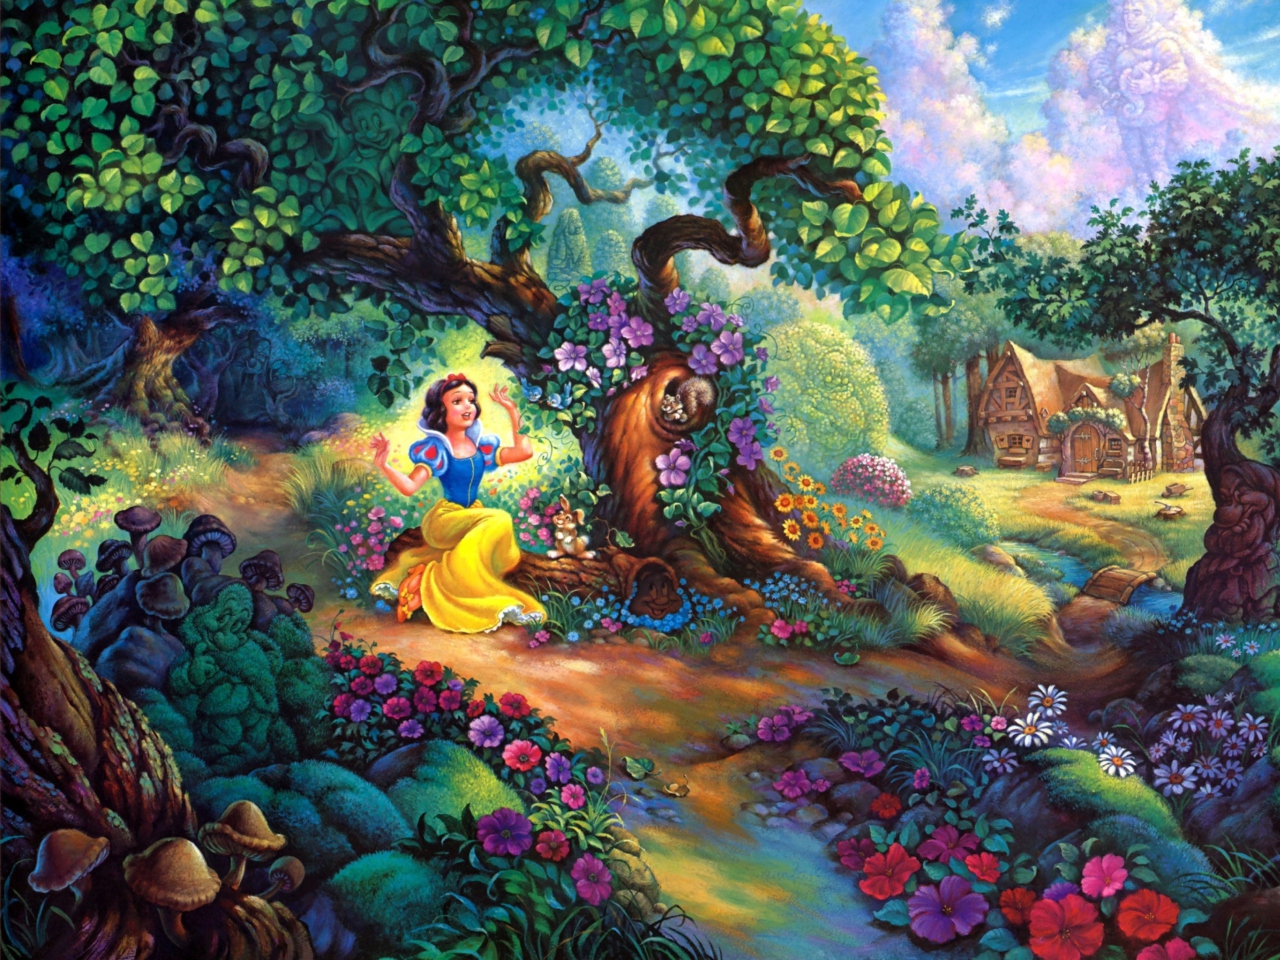 Das Snow White In Magical Forest Wallpaper 1280x960